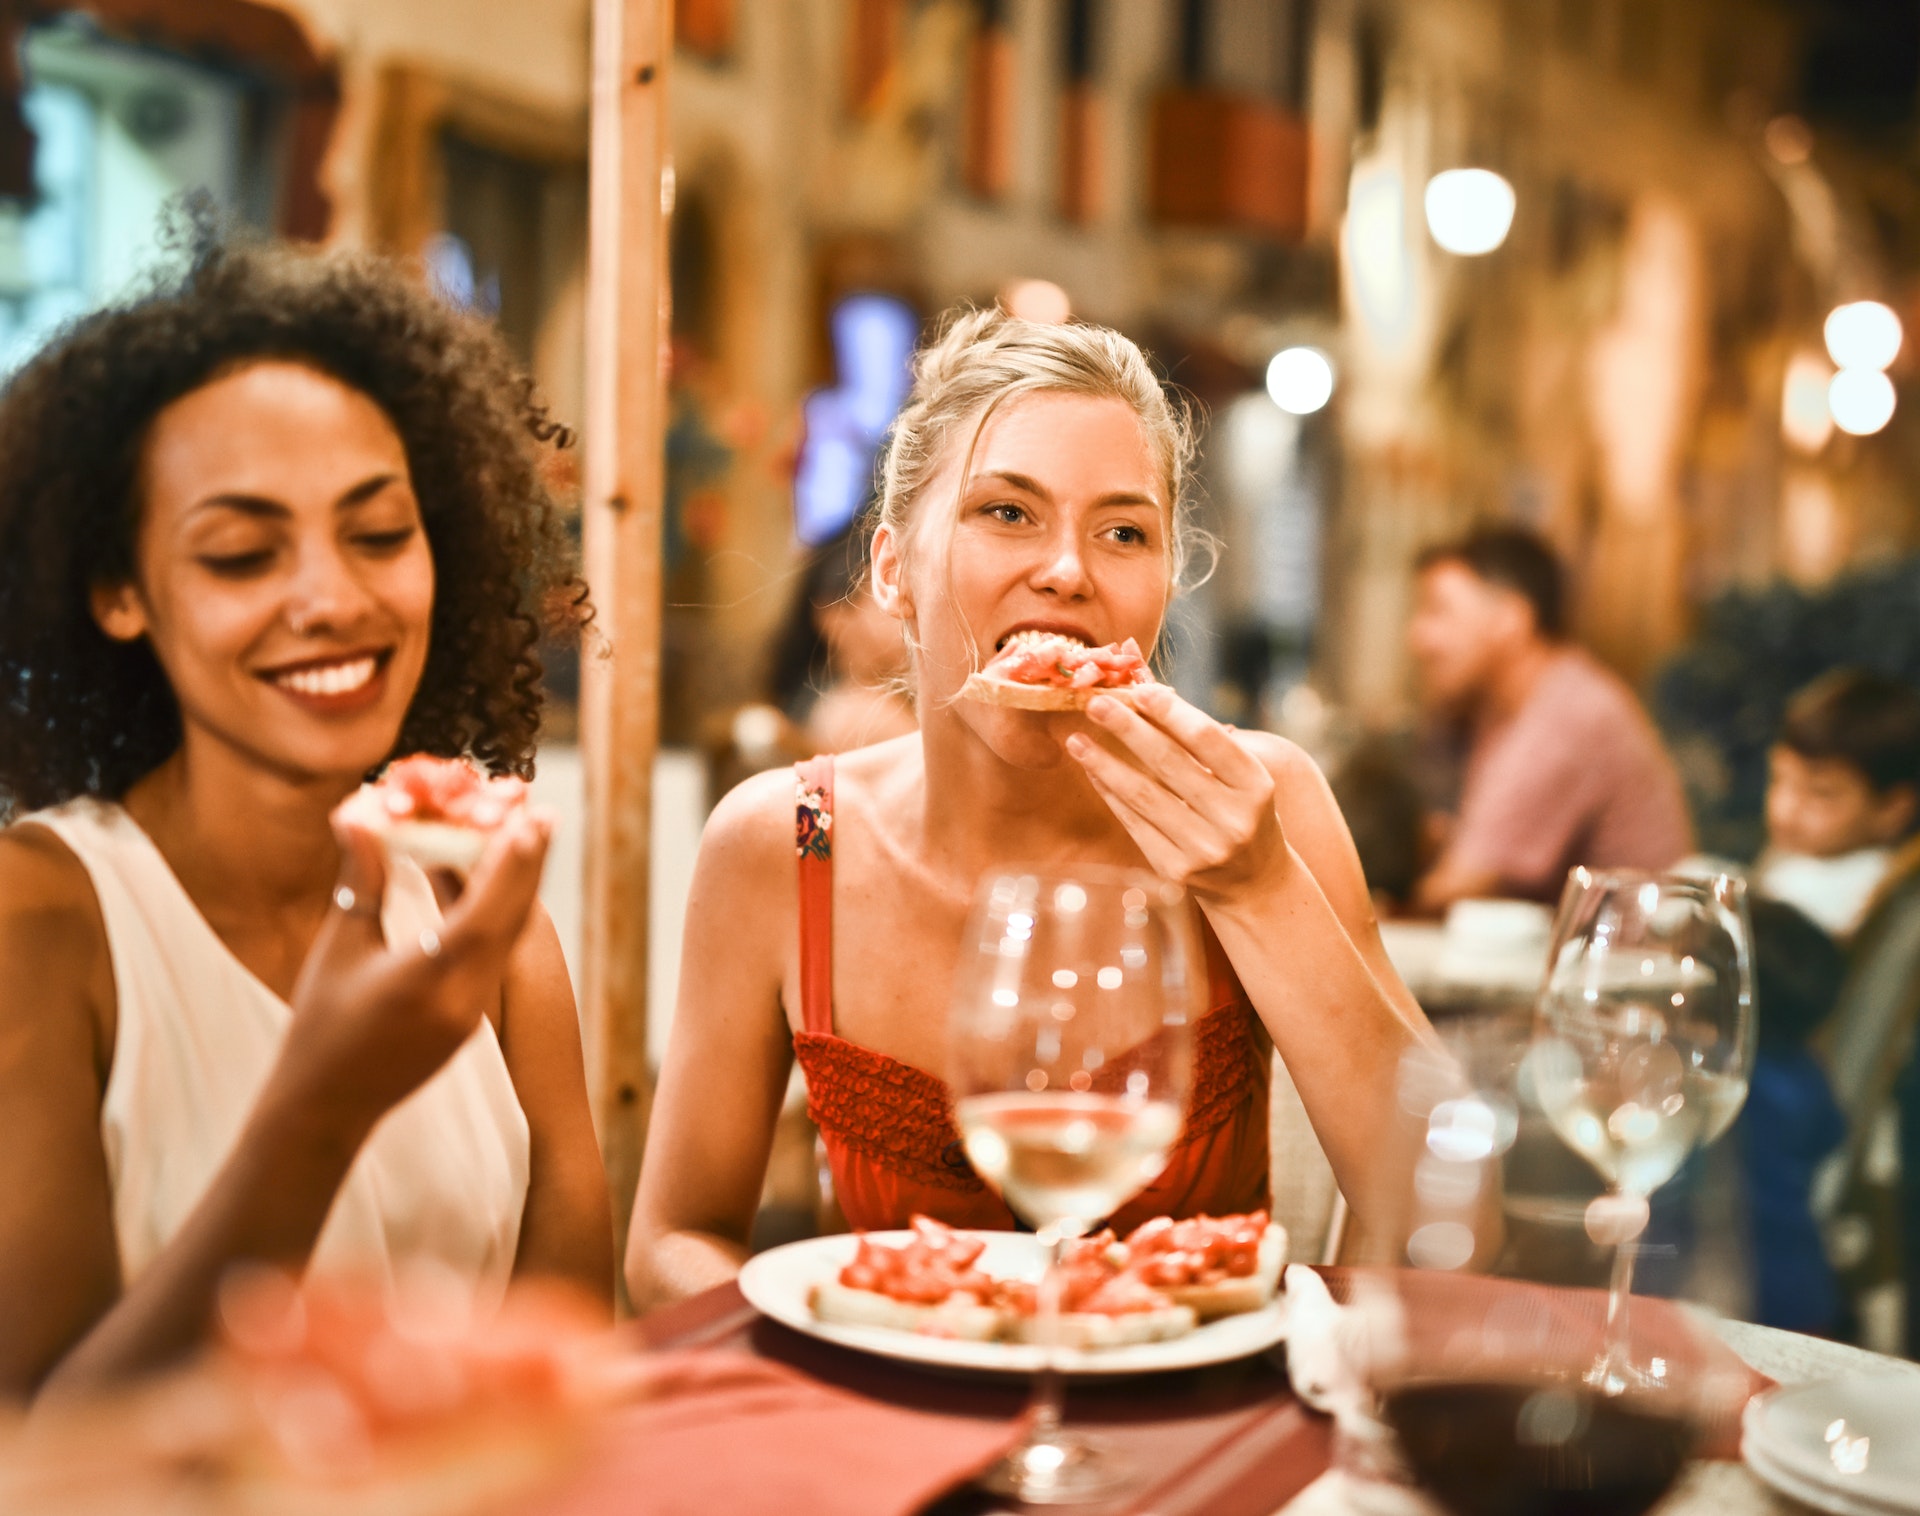 Women eating and having drinks at a restaurant | Source: Pexels